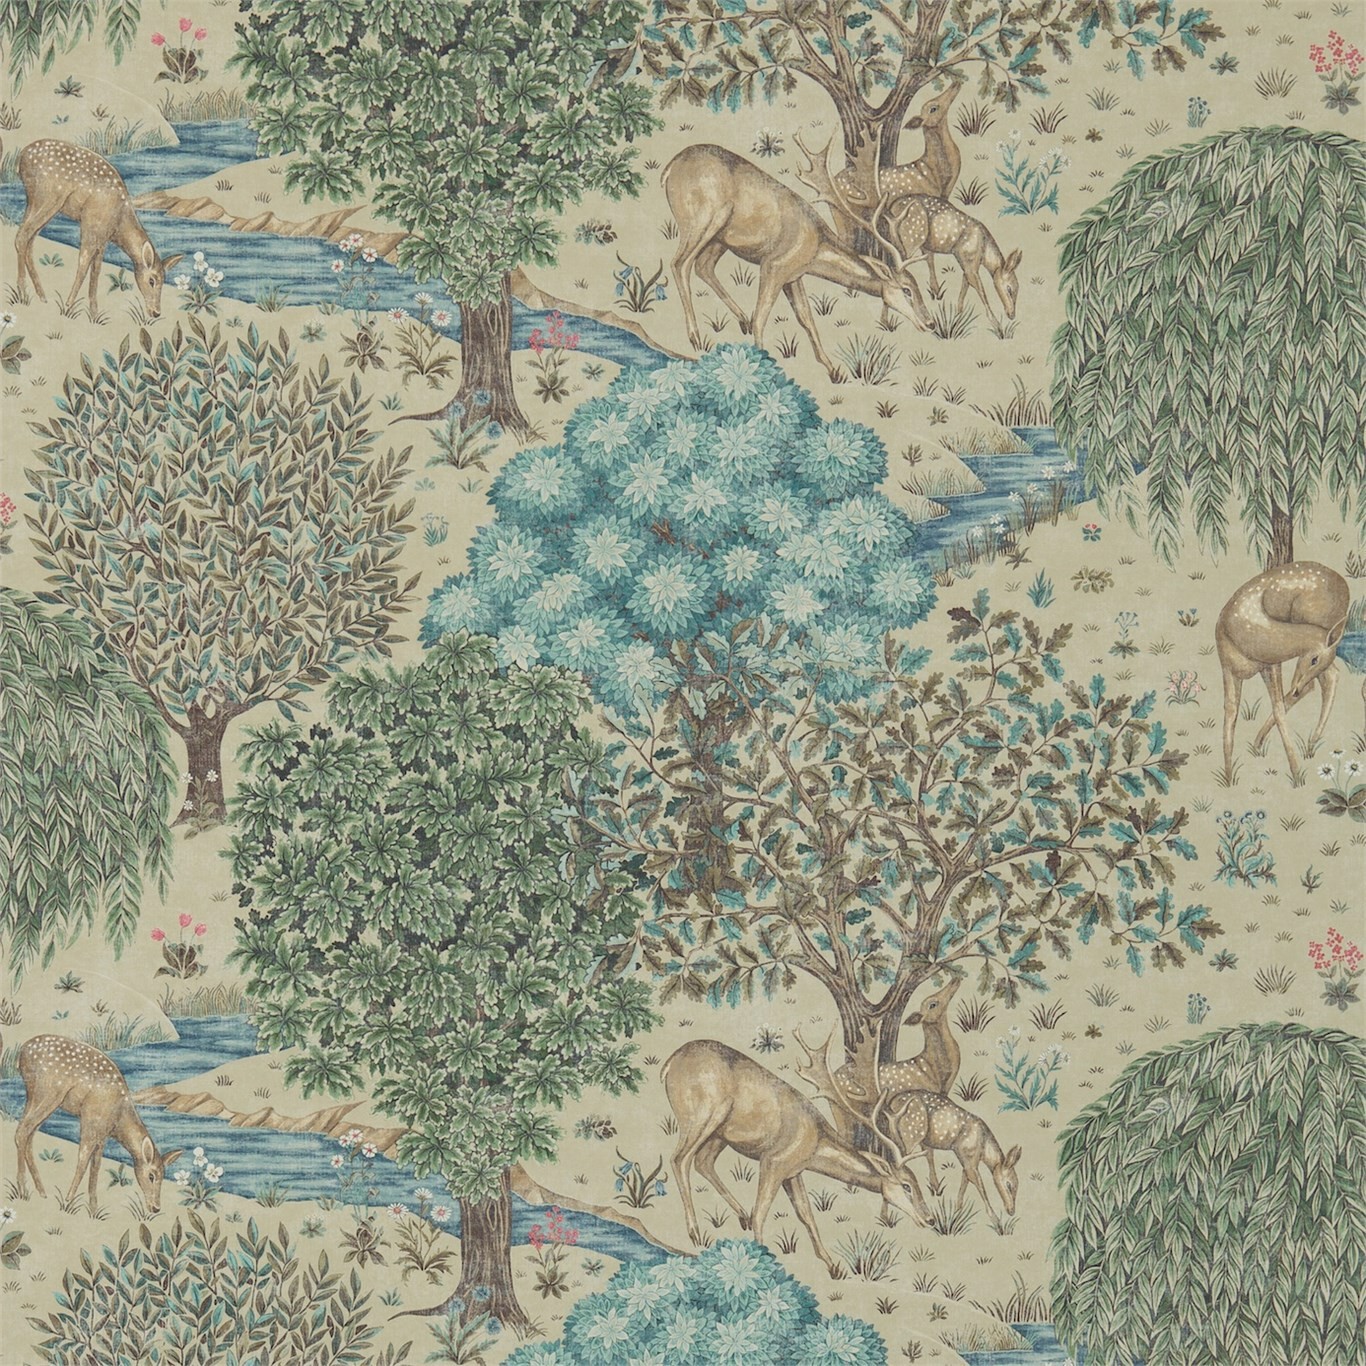 a wallpaper with deer and trees on it